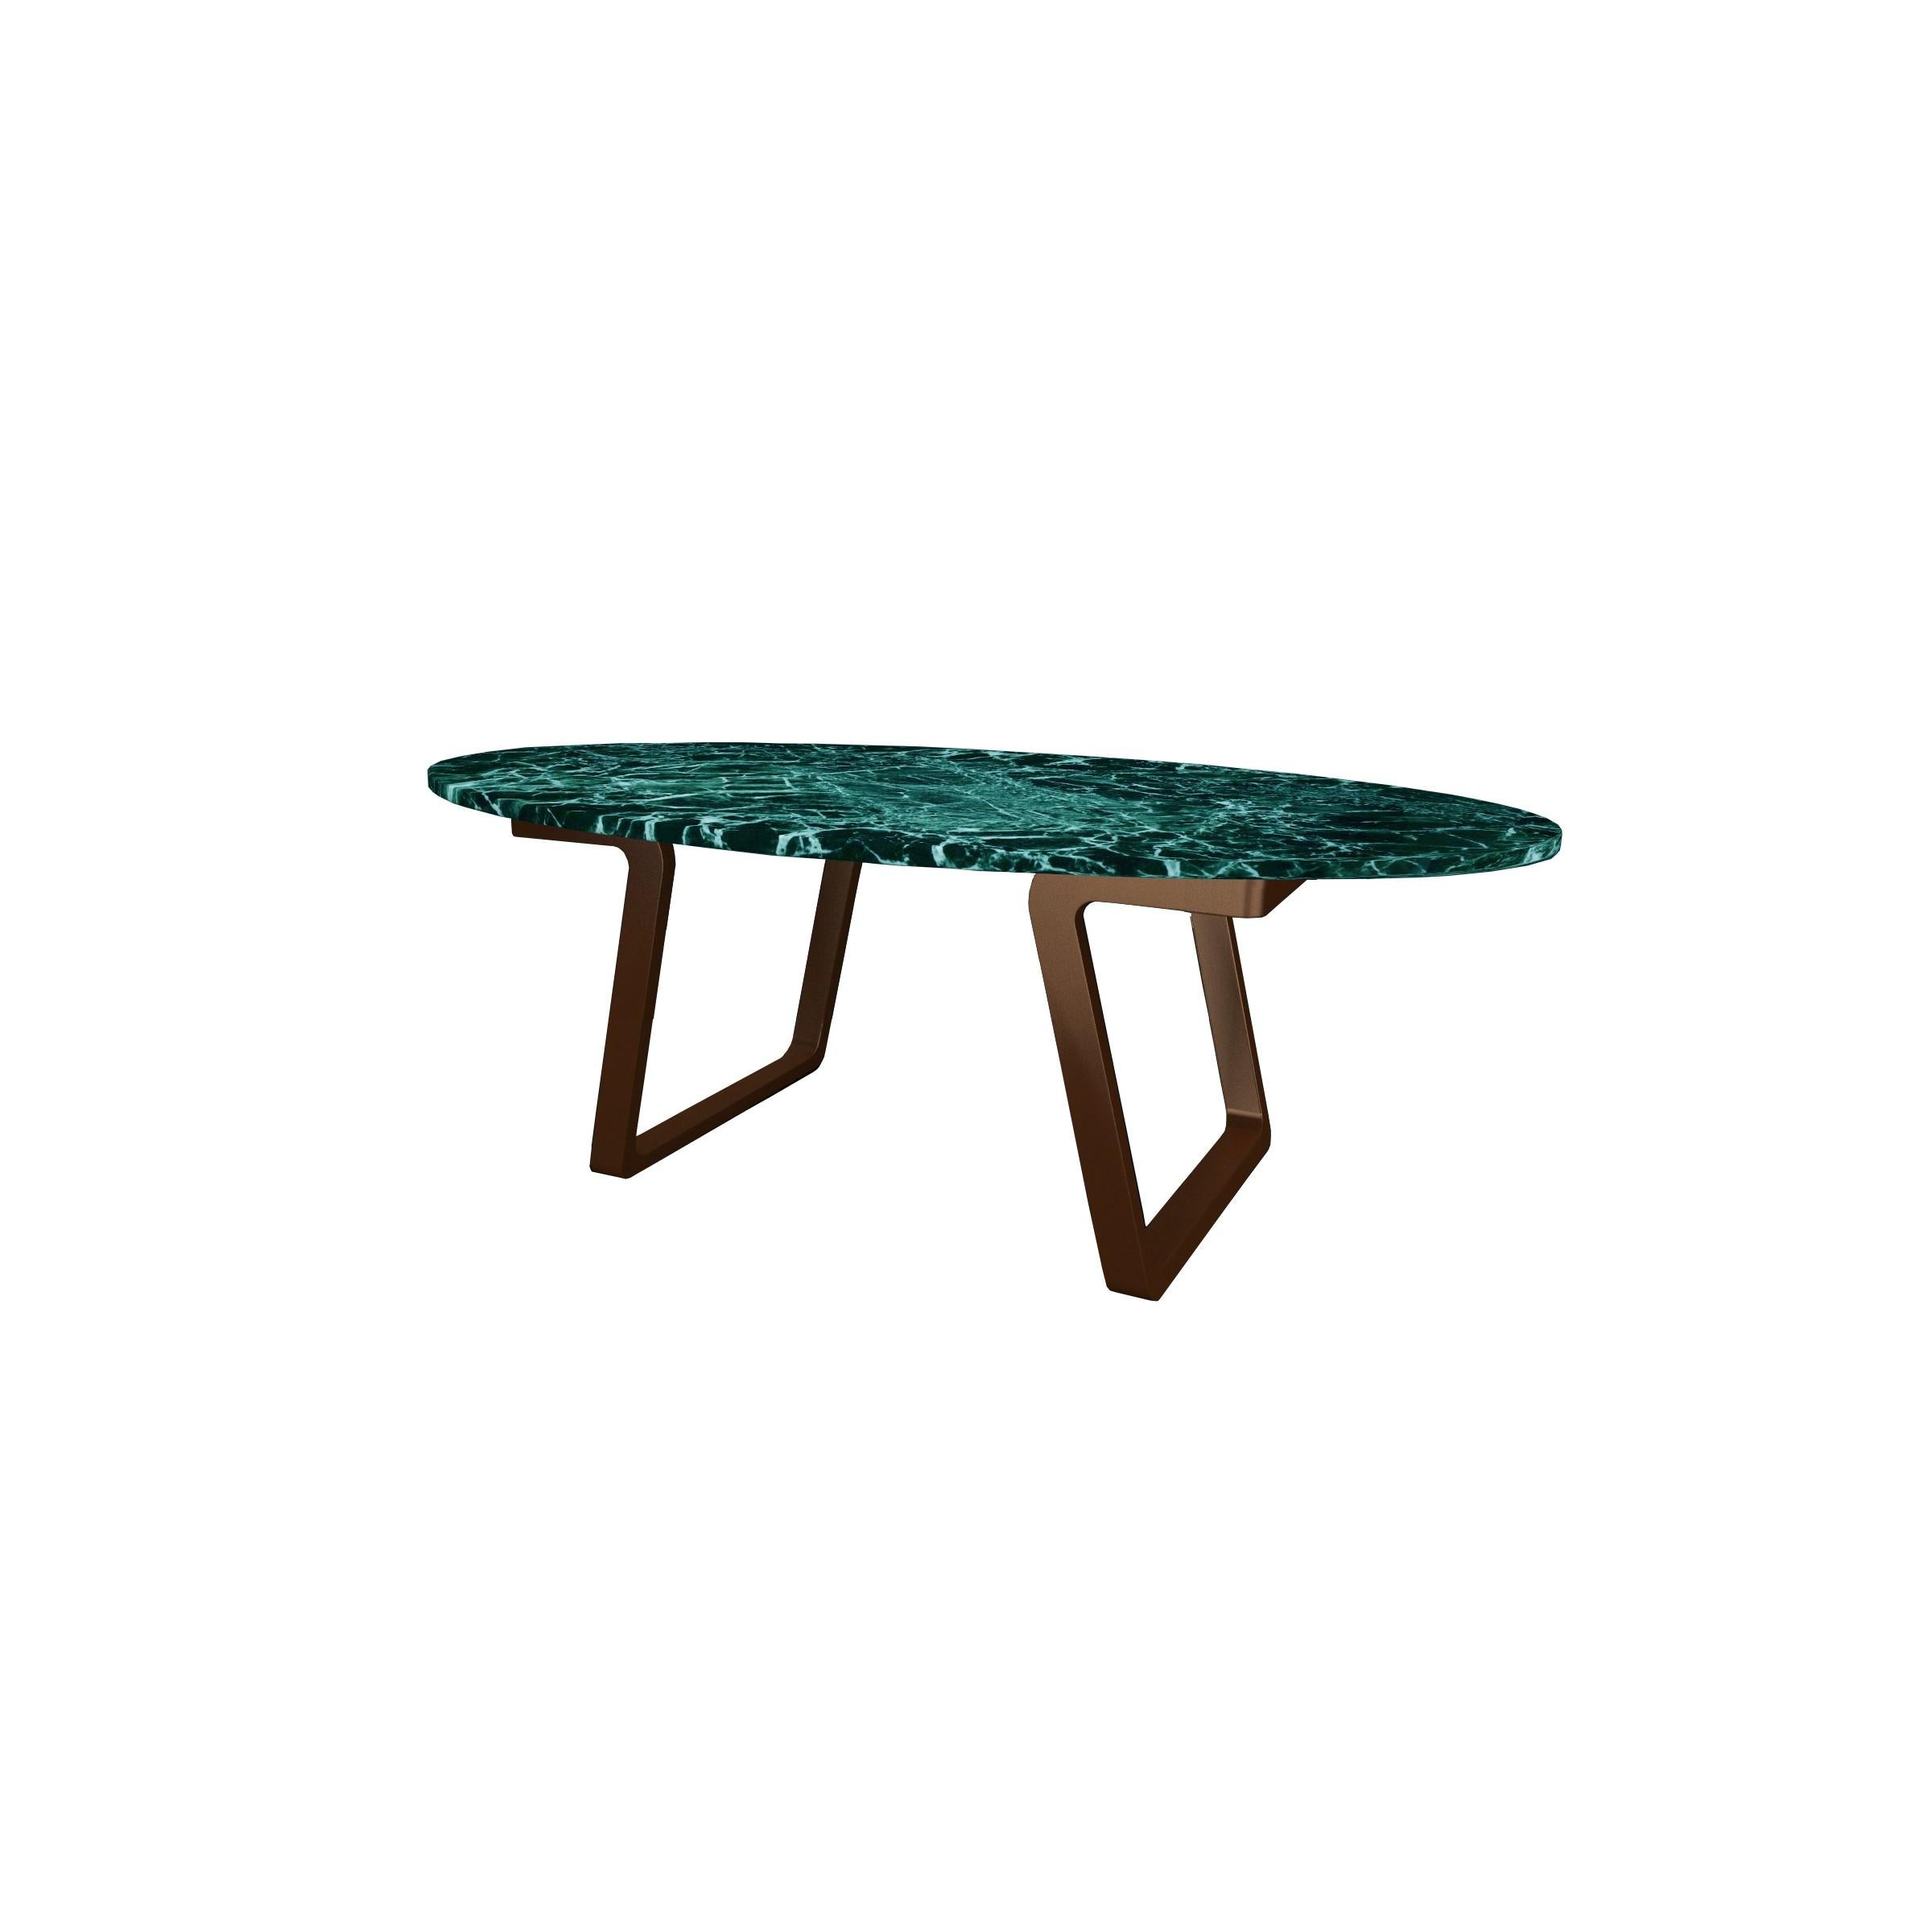 Chinese NORDST JERRY Coffee Table, Italian Grey Rain Marble, Danish Modern Design, New For Sale